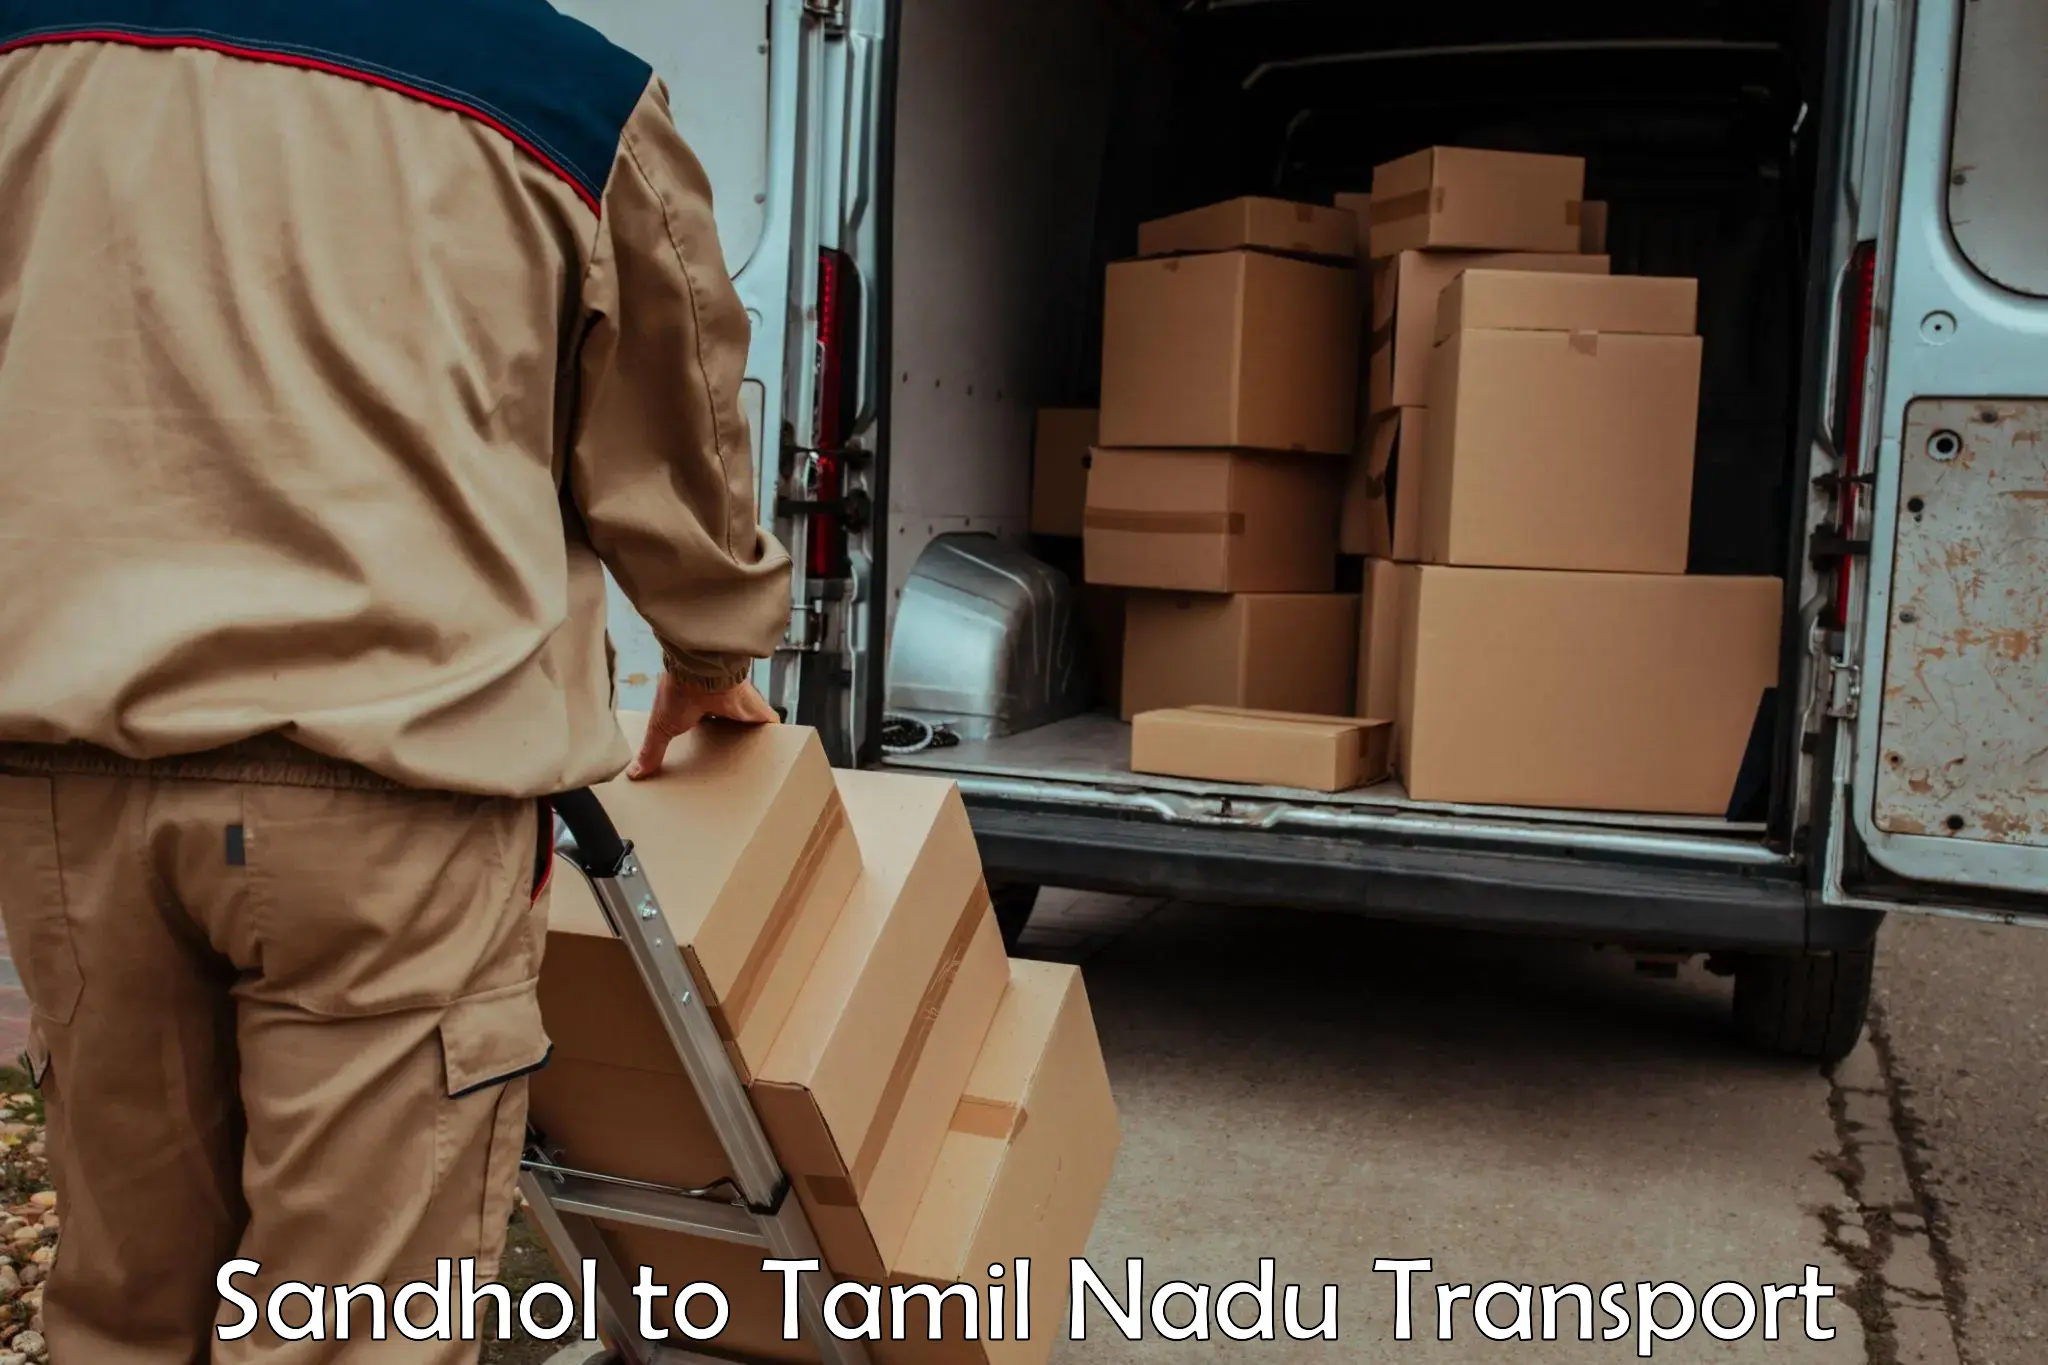 Truck transport companies in India in Sandhol to Vellore Institute of Technology